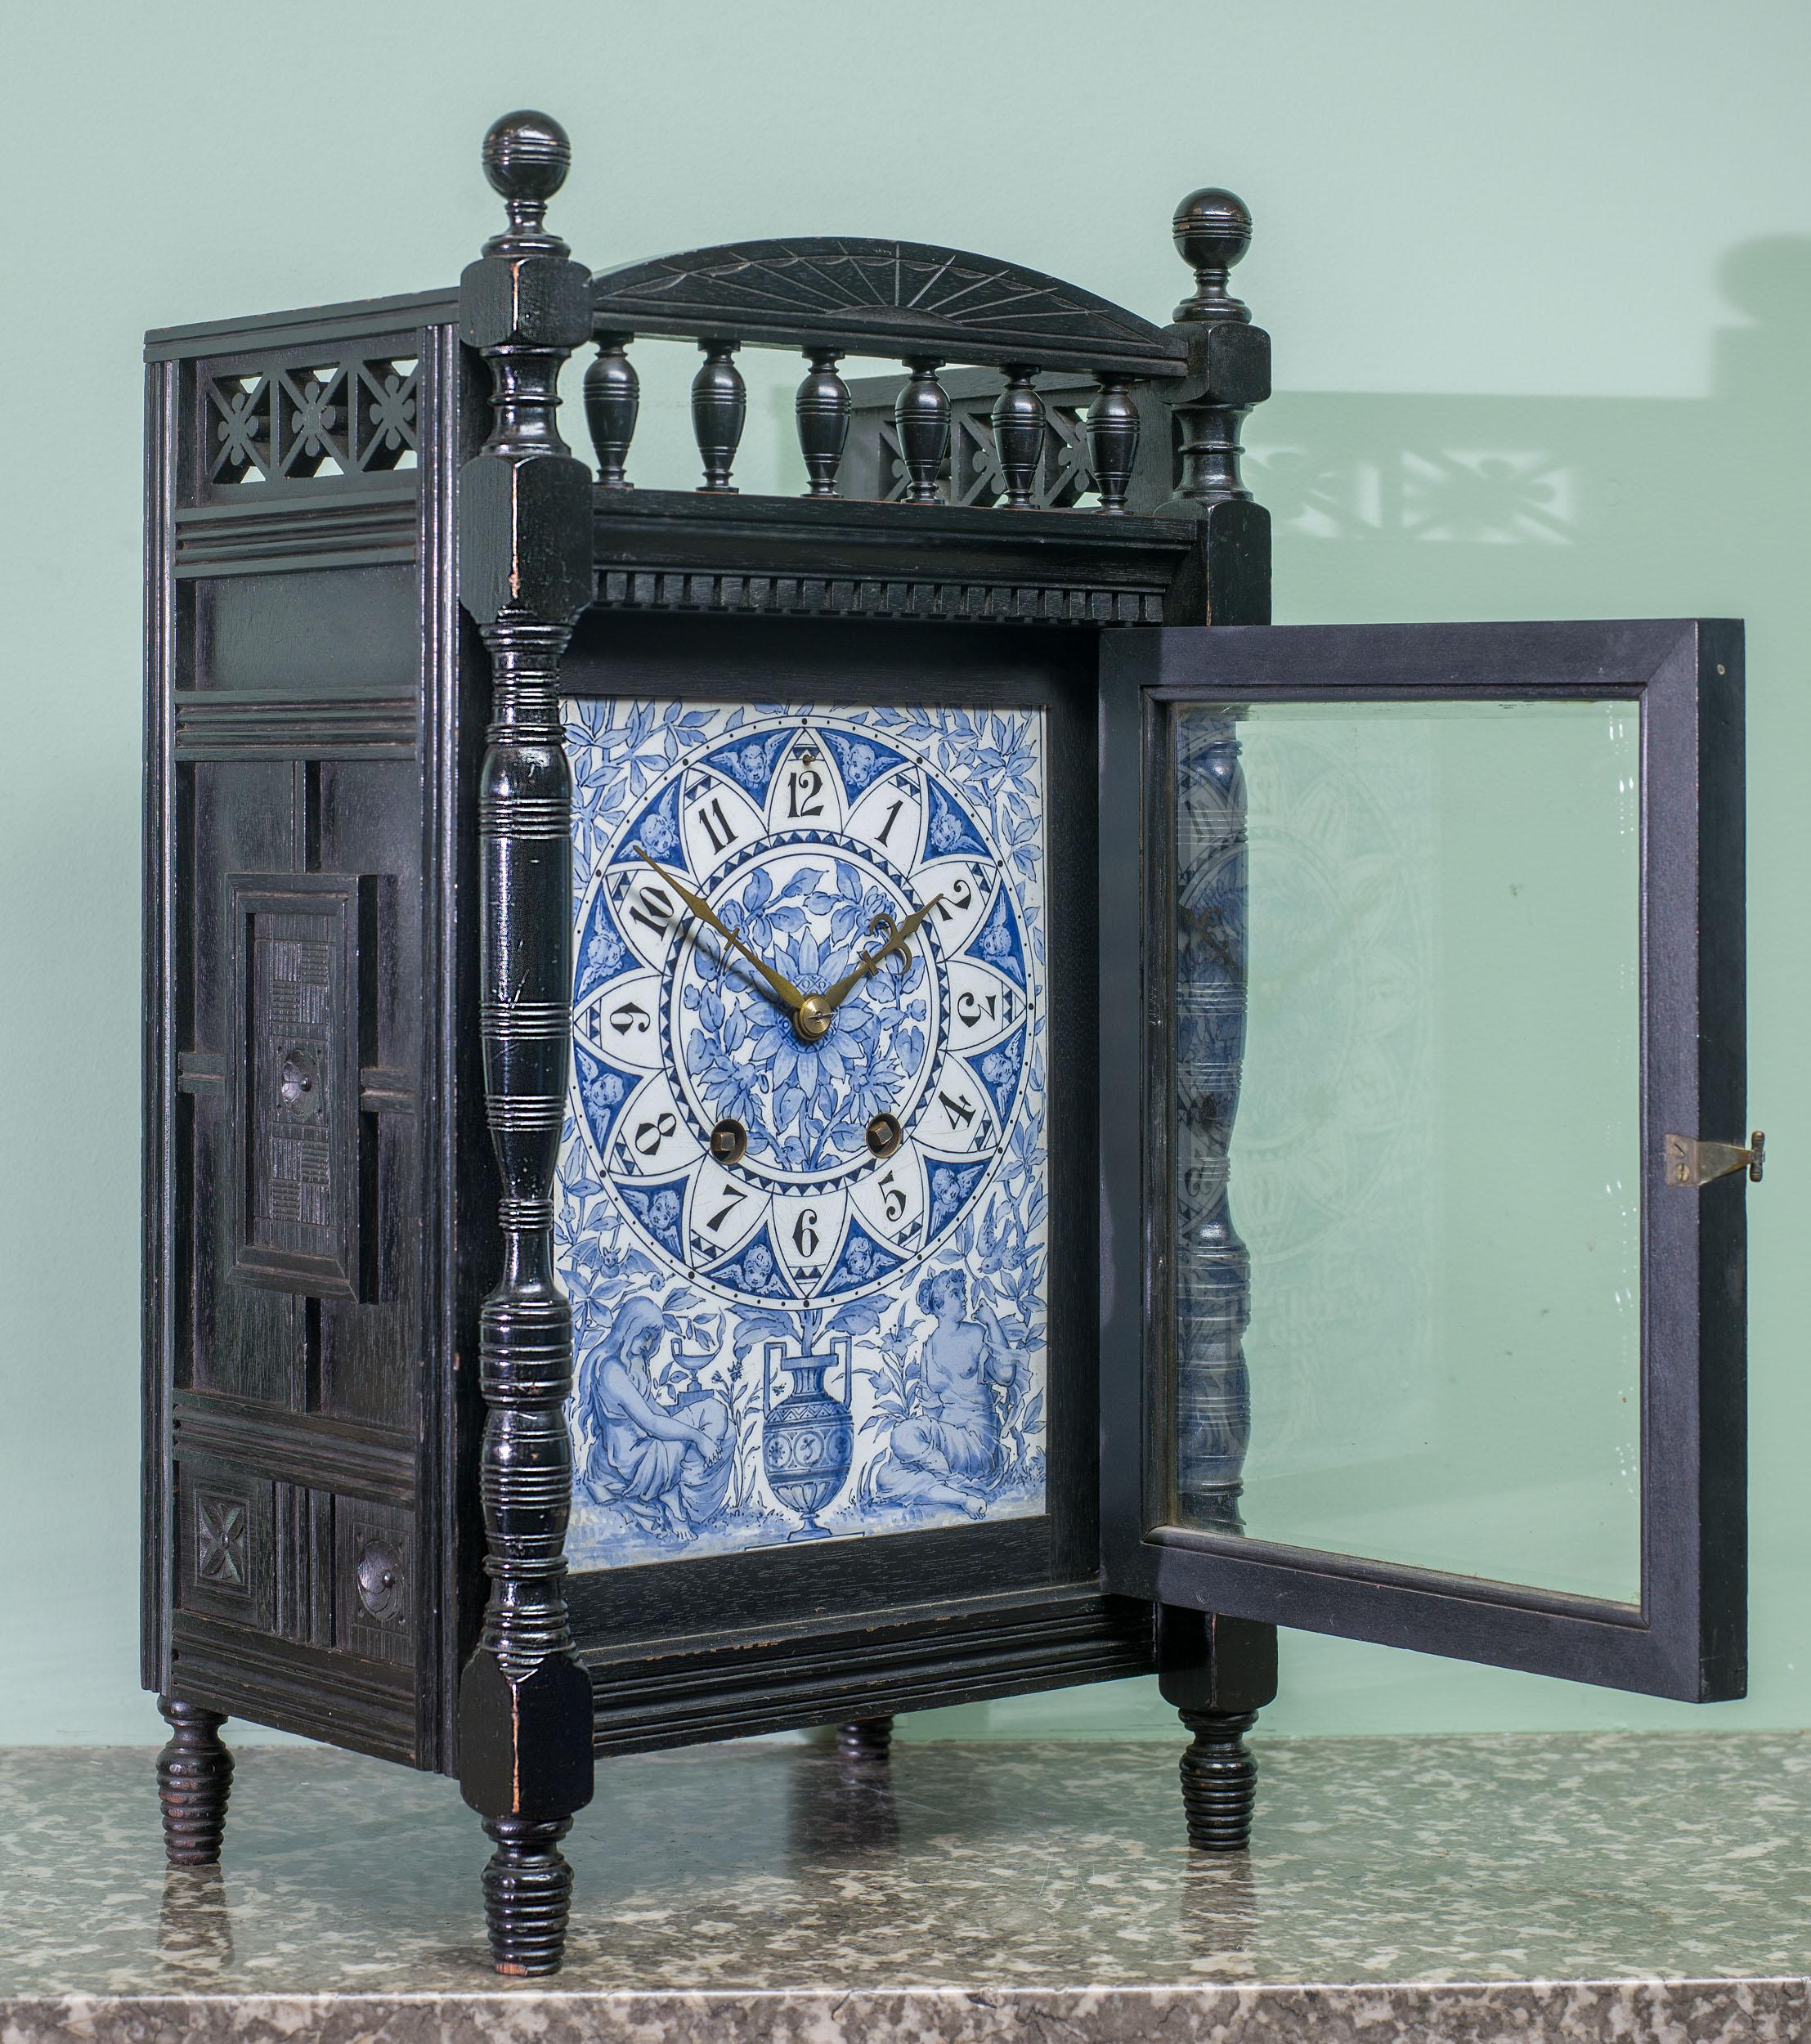 A magnificent Aesthetic Movement mantel clock, with an ebonised mahogany case and an exquisitely painted dial. The case embodies the style of the Aesthetic Movement, with an arched and turned gallery, surmounted by two turned ball finials, with a